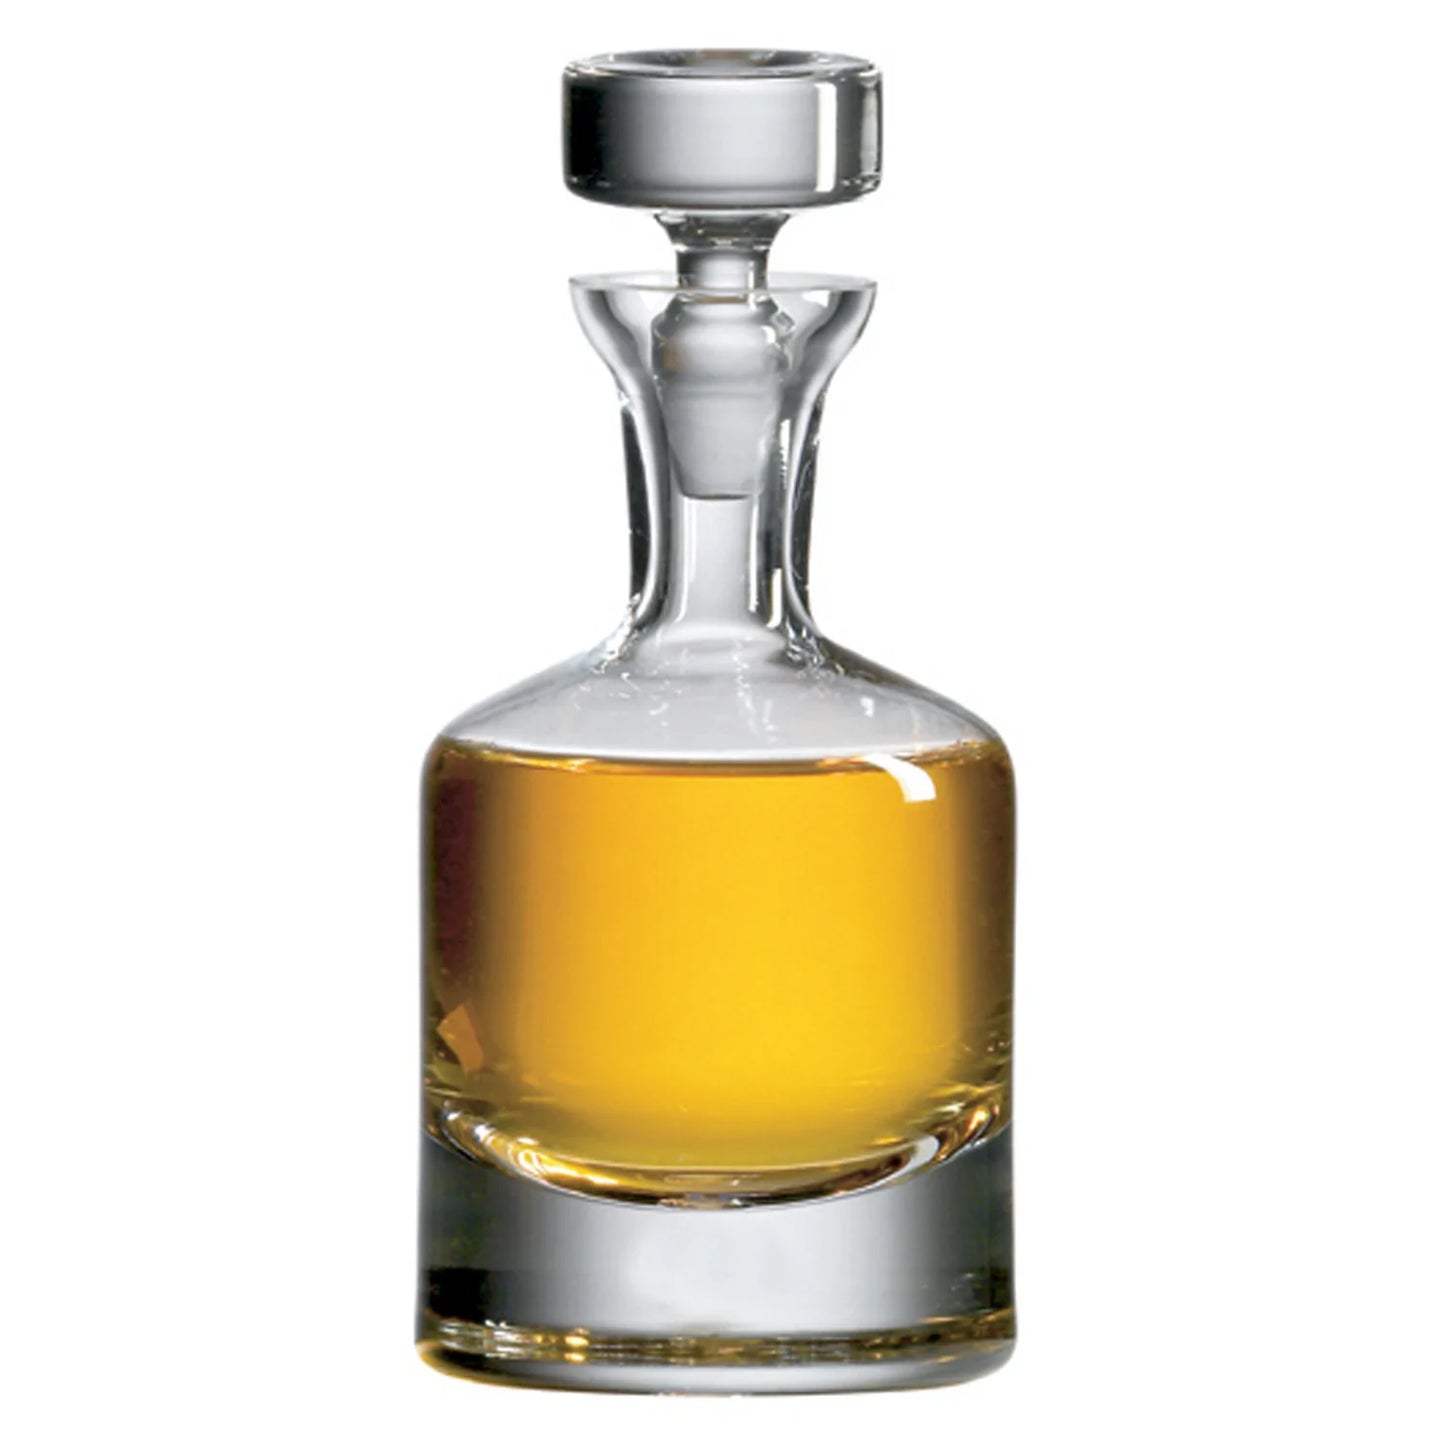 Ravenscroft Crystal Buckingham Decanter with Free Luxury Satin Decanter and Stopper Bags W3134